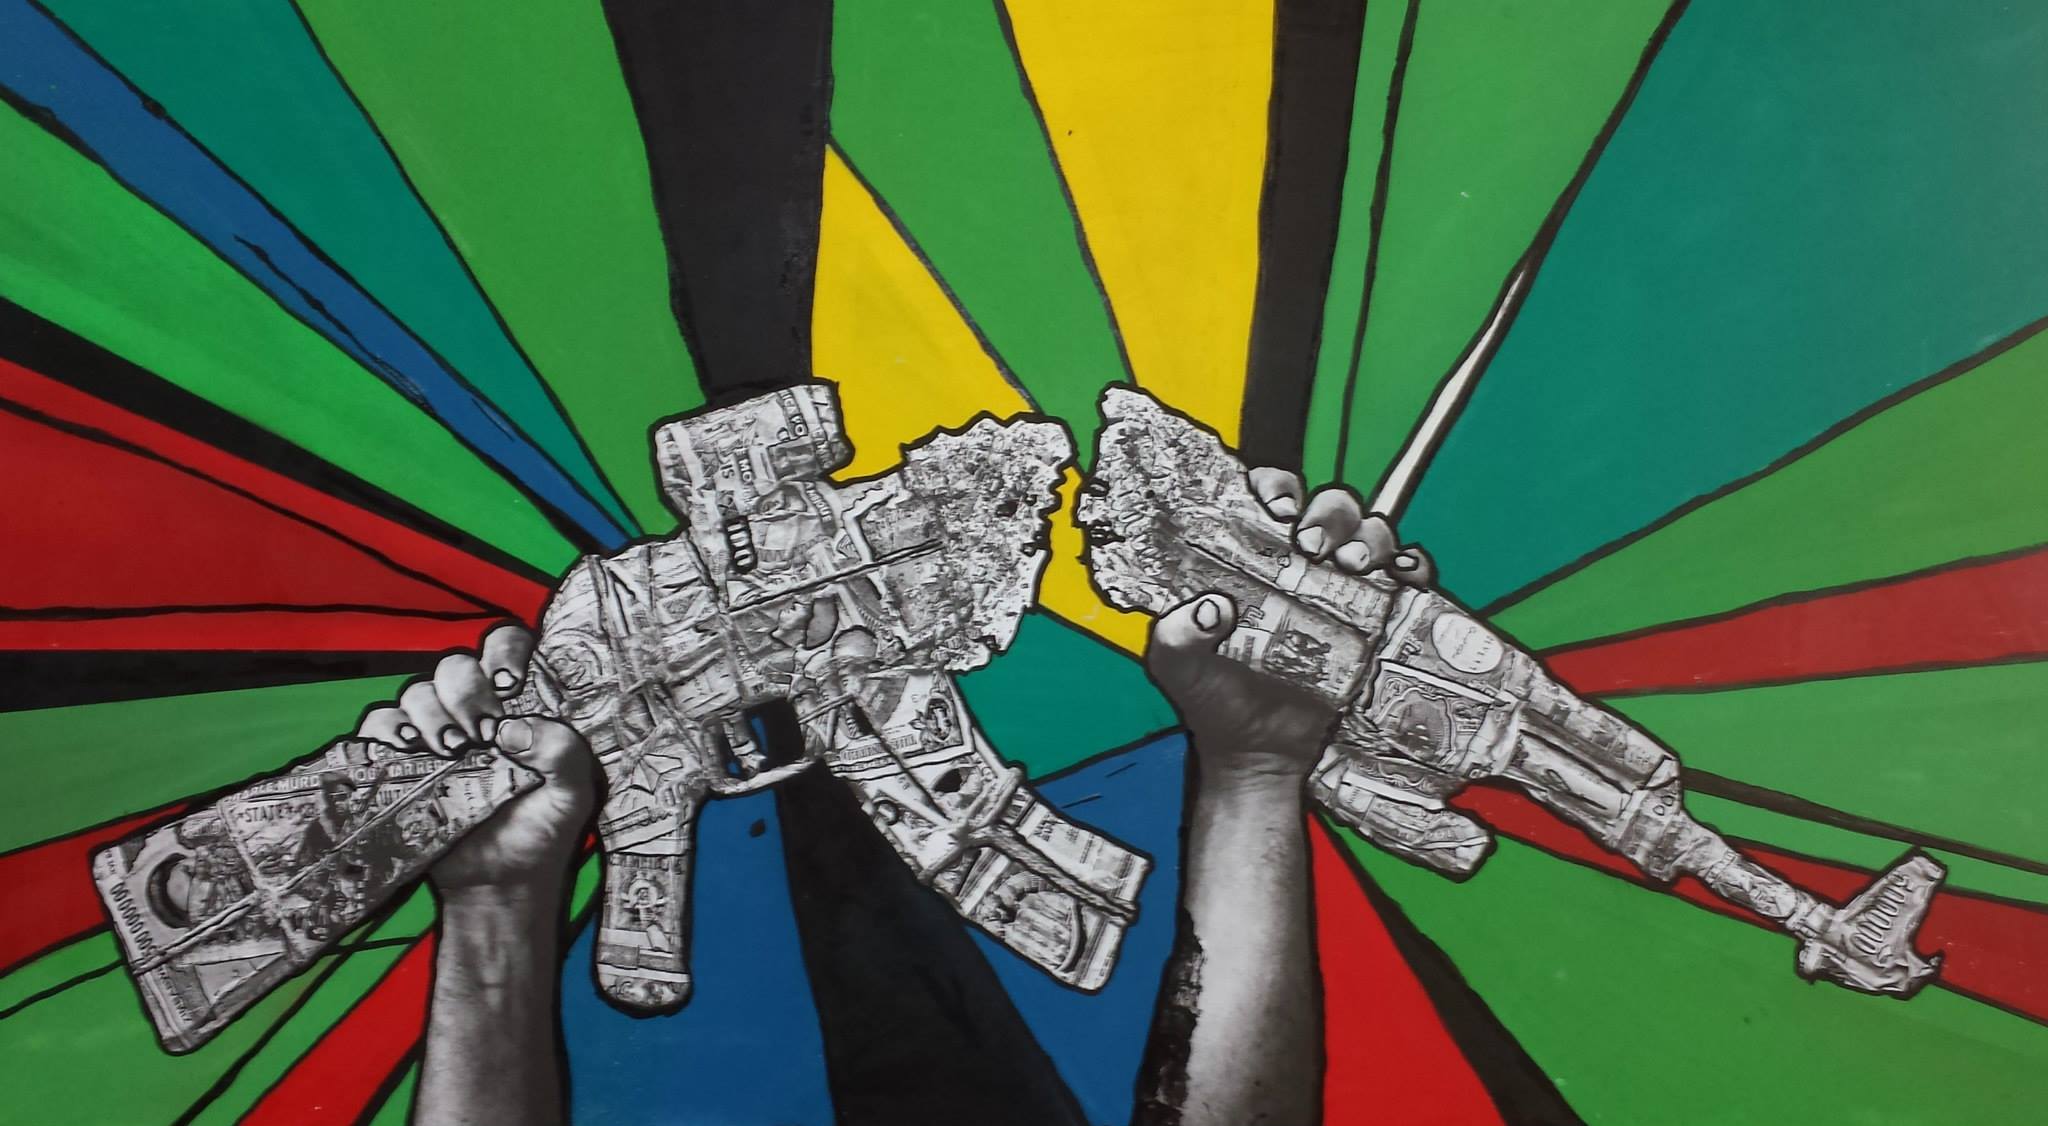 A gun made of cash is broken in half, on a multicoloured background